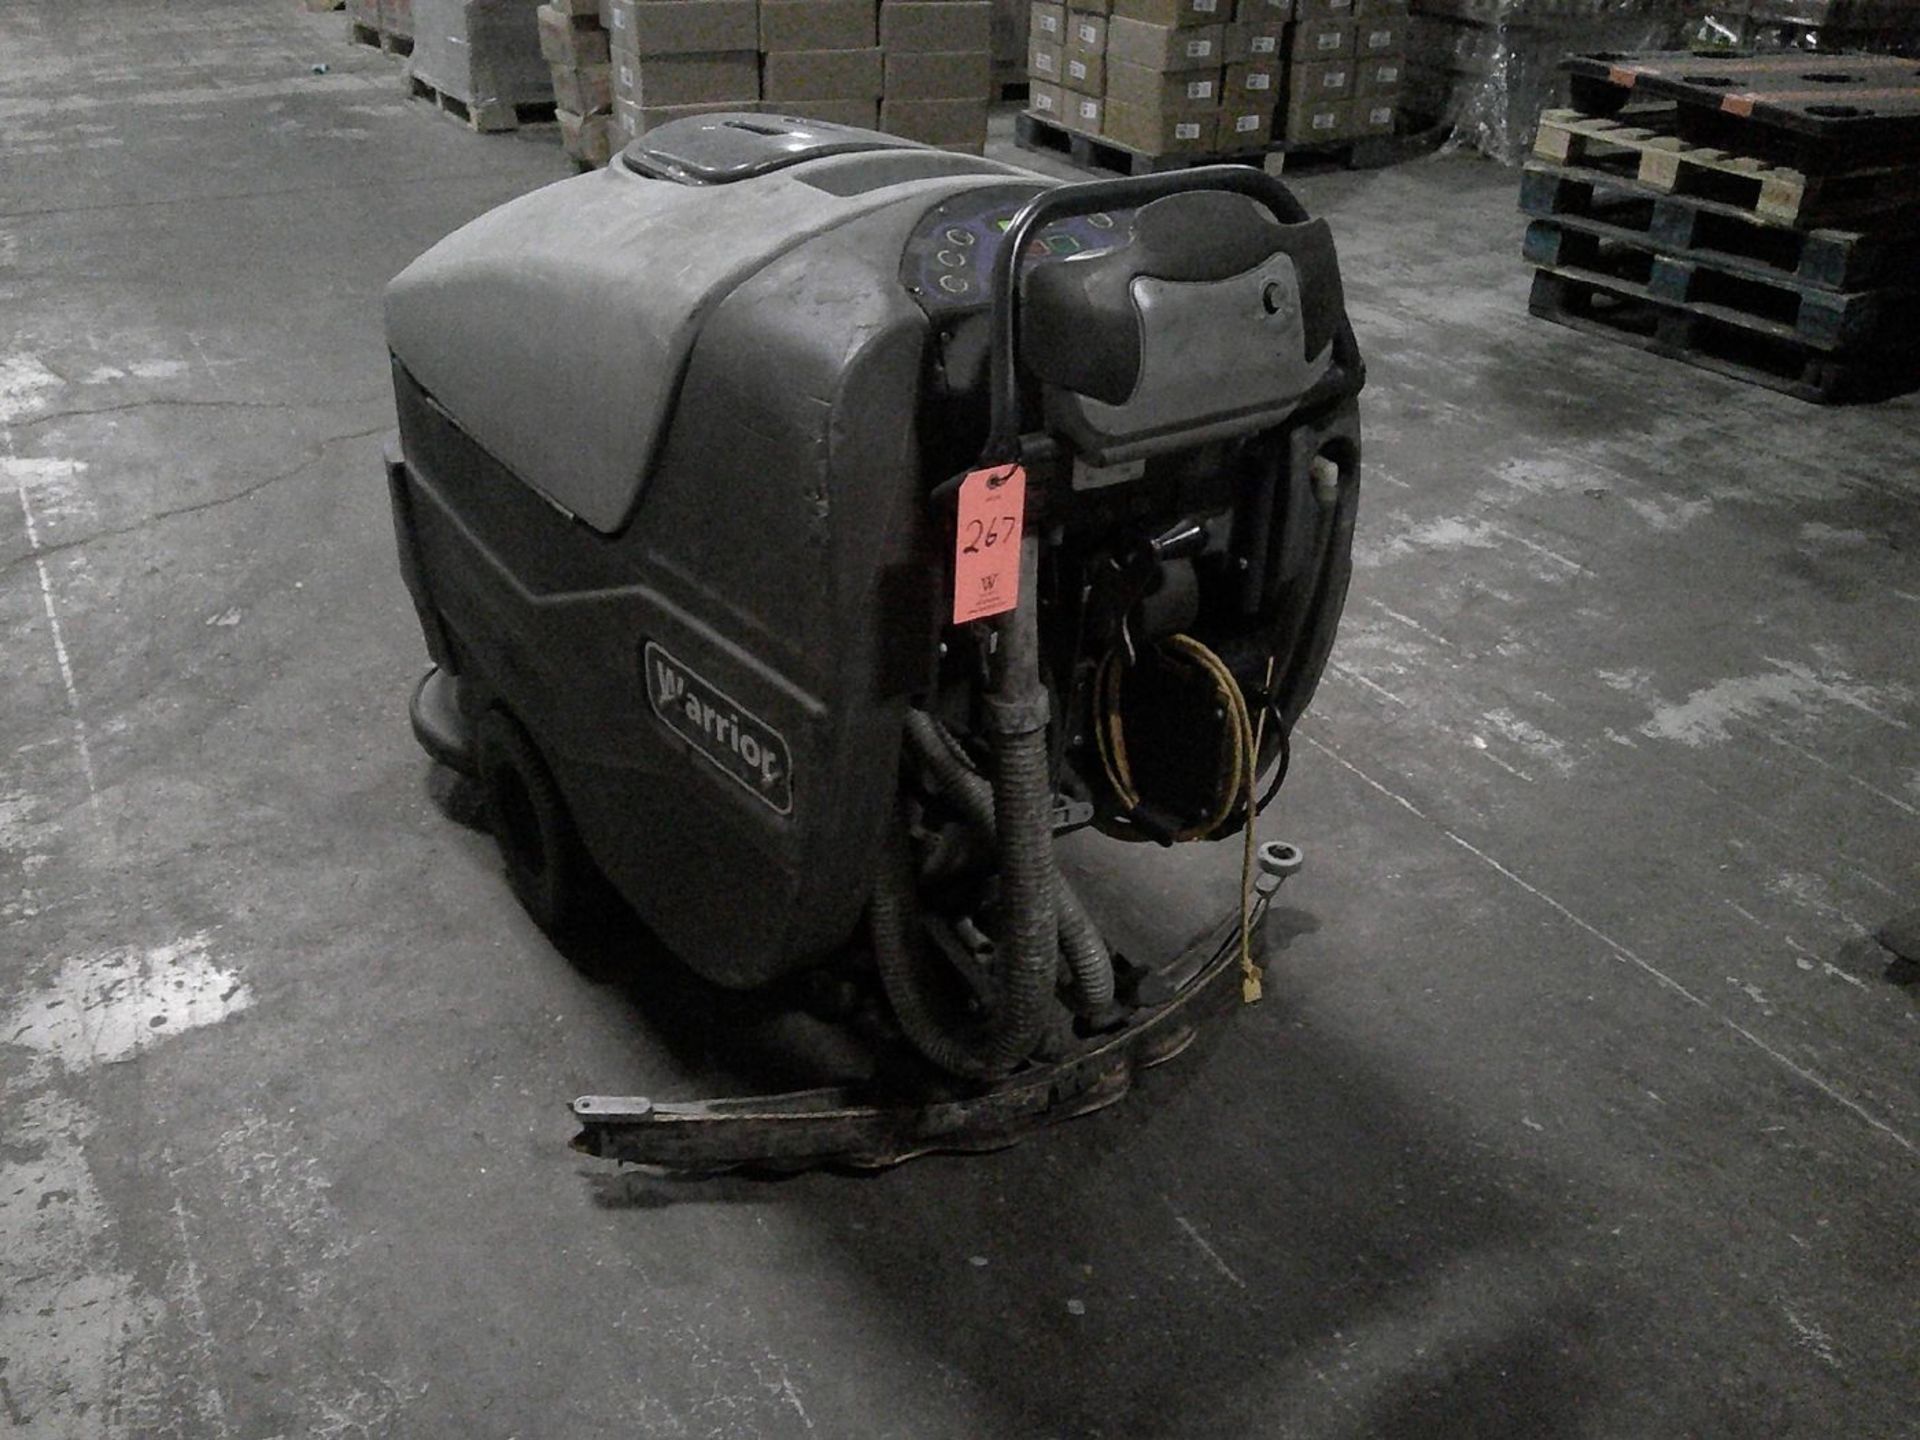 Advance Warrior AXP Walk Behind Floor Scrubber; with 444 Hours, Attached Battery Charger - Image 4 of 4